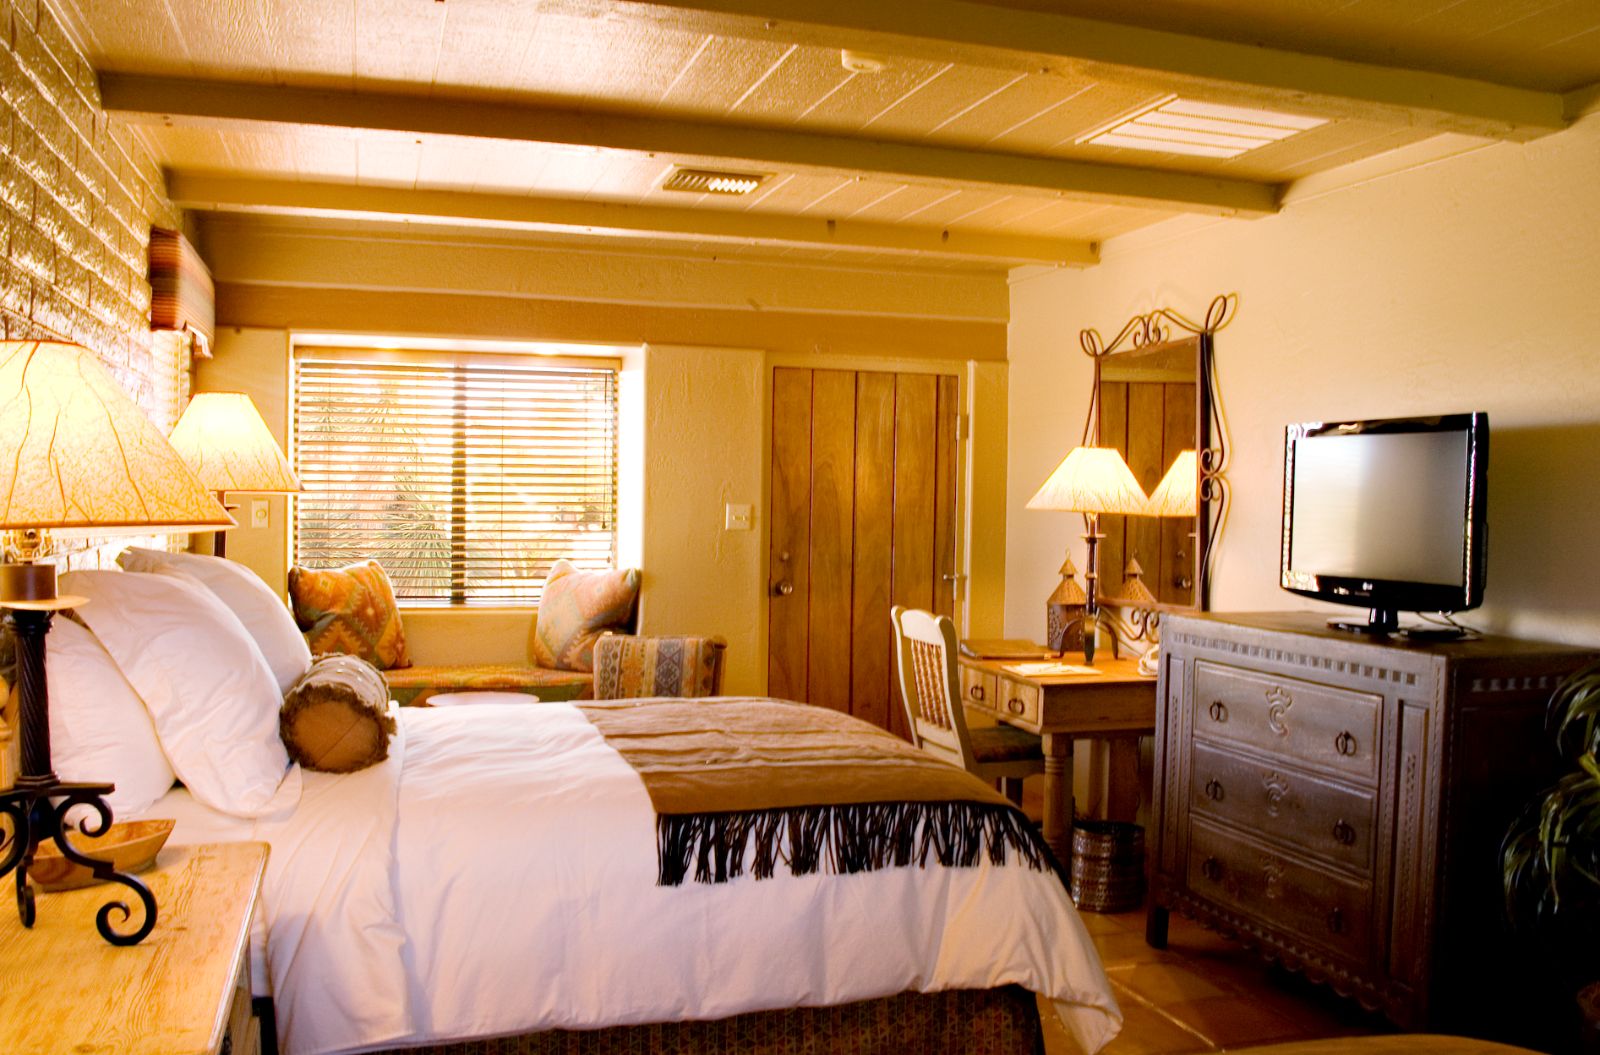 King bed in ranch room with rustic western decor